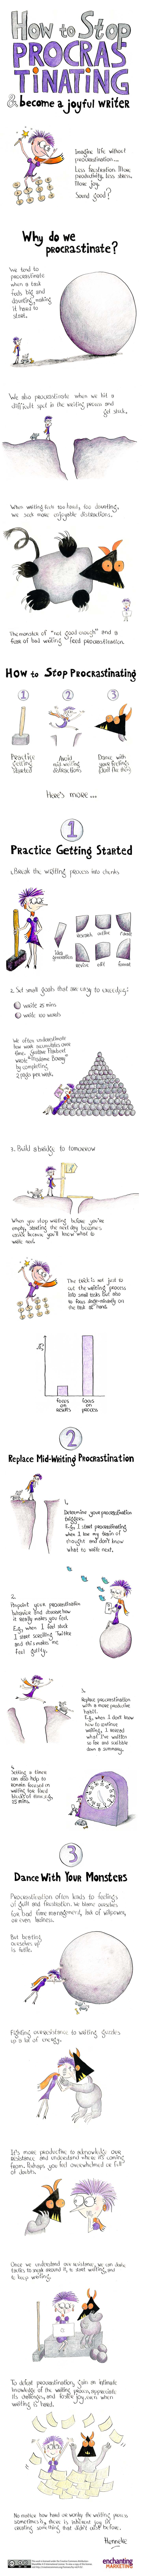 how to stop procrastinating when youre writing infographic